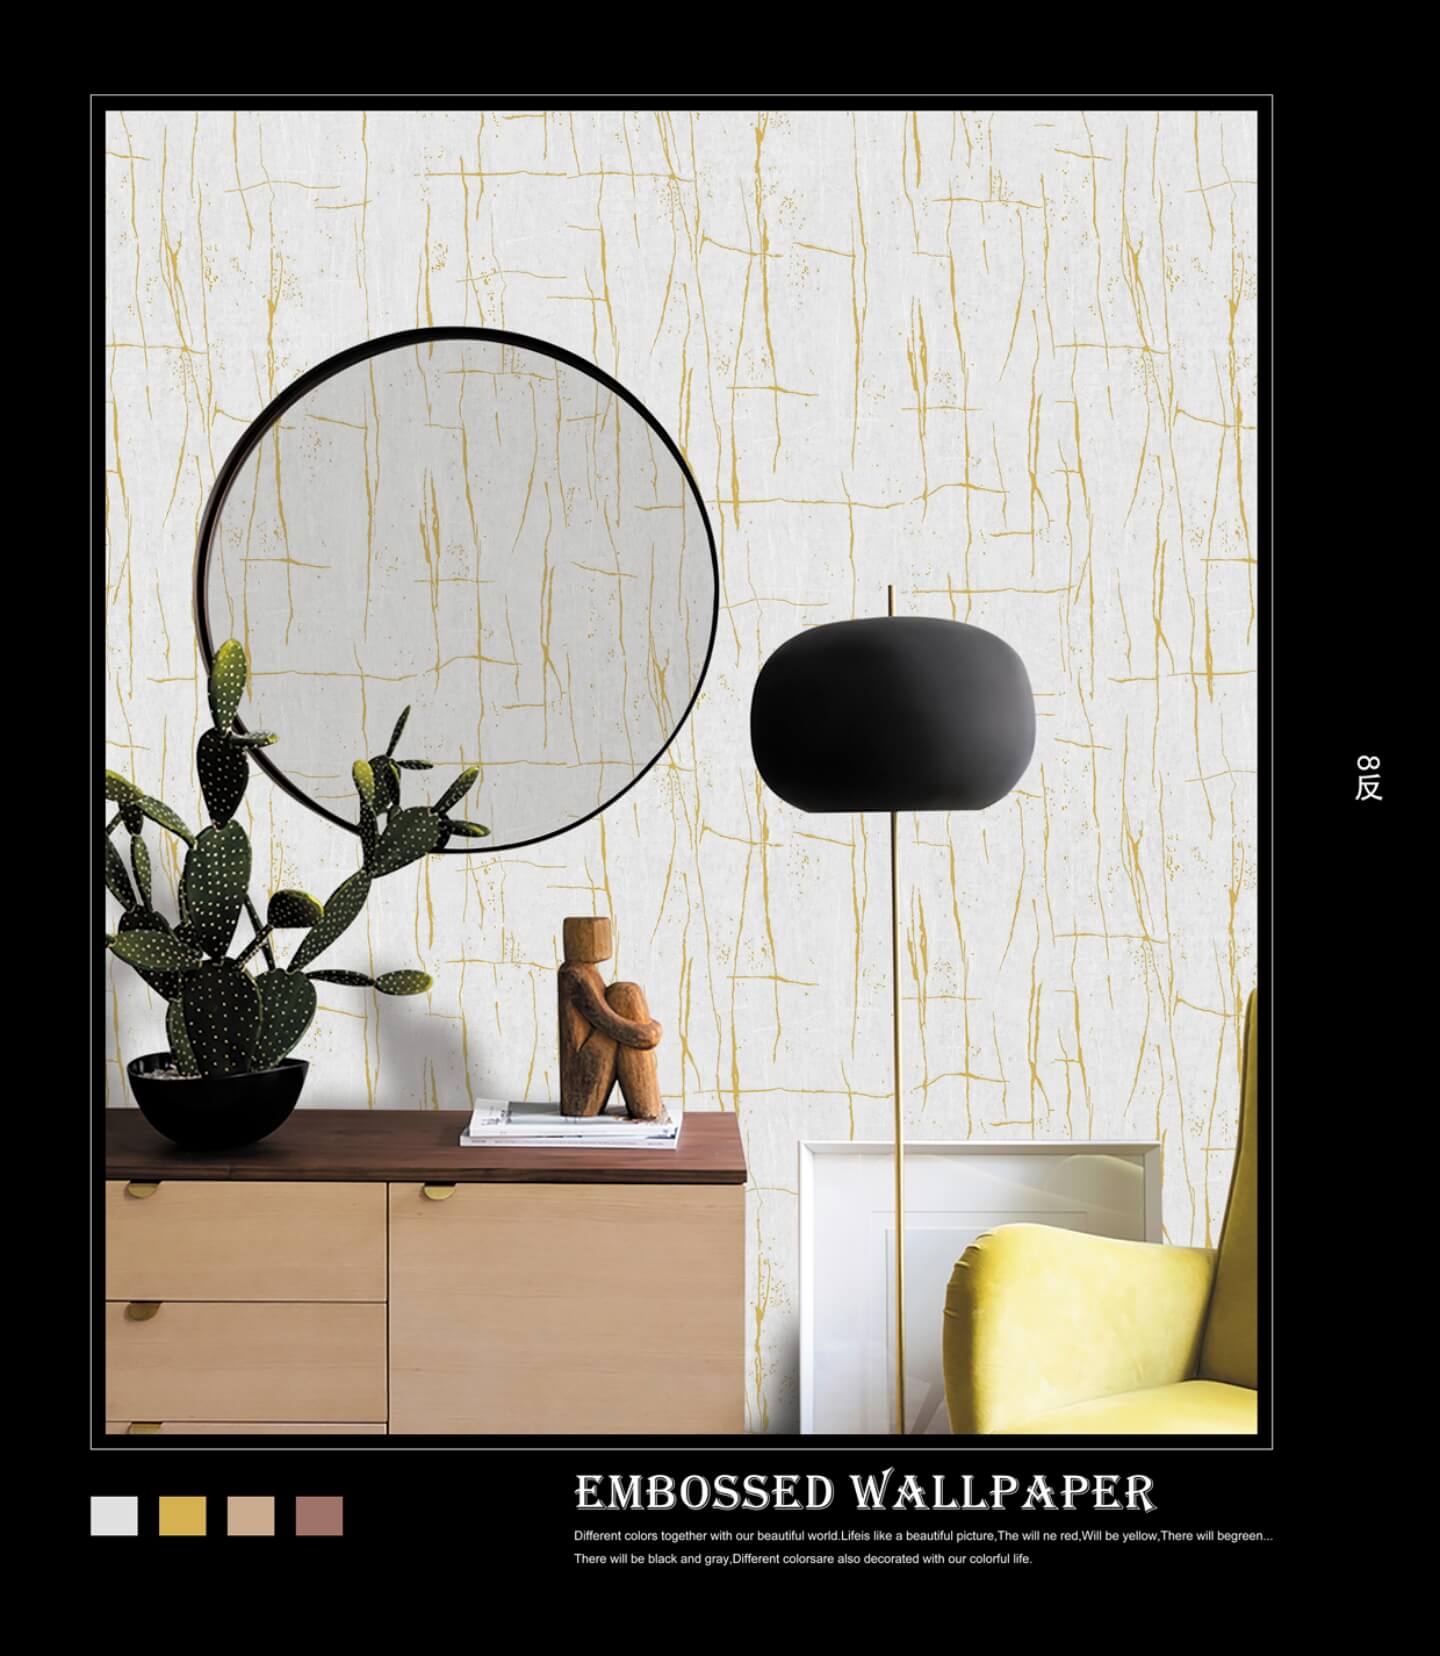 Multicolor Non-Adhesive 3D Designer Wallpaper Suitable For Bedroom, Living Room, Office, High-Quality PVC Water-resistant Wallpapers (9)